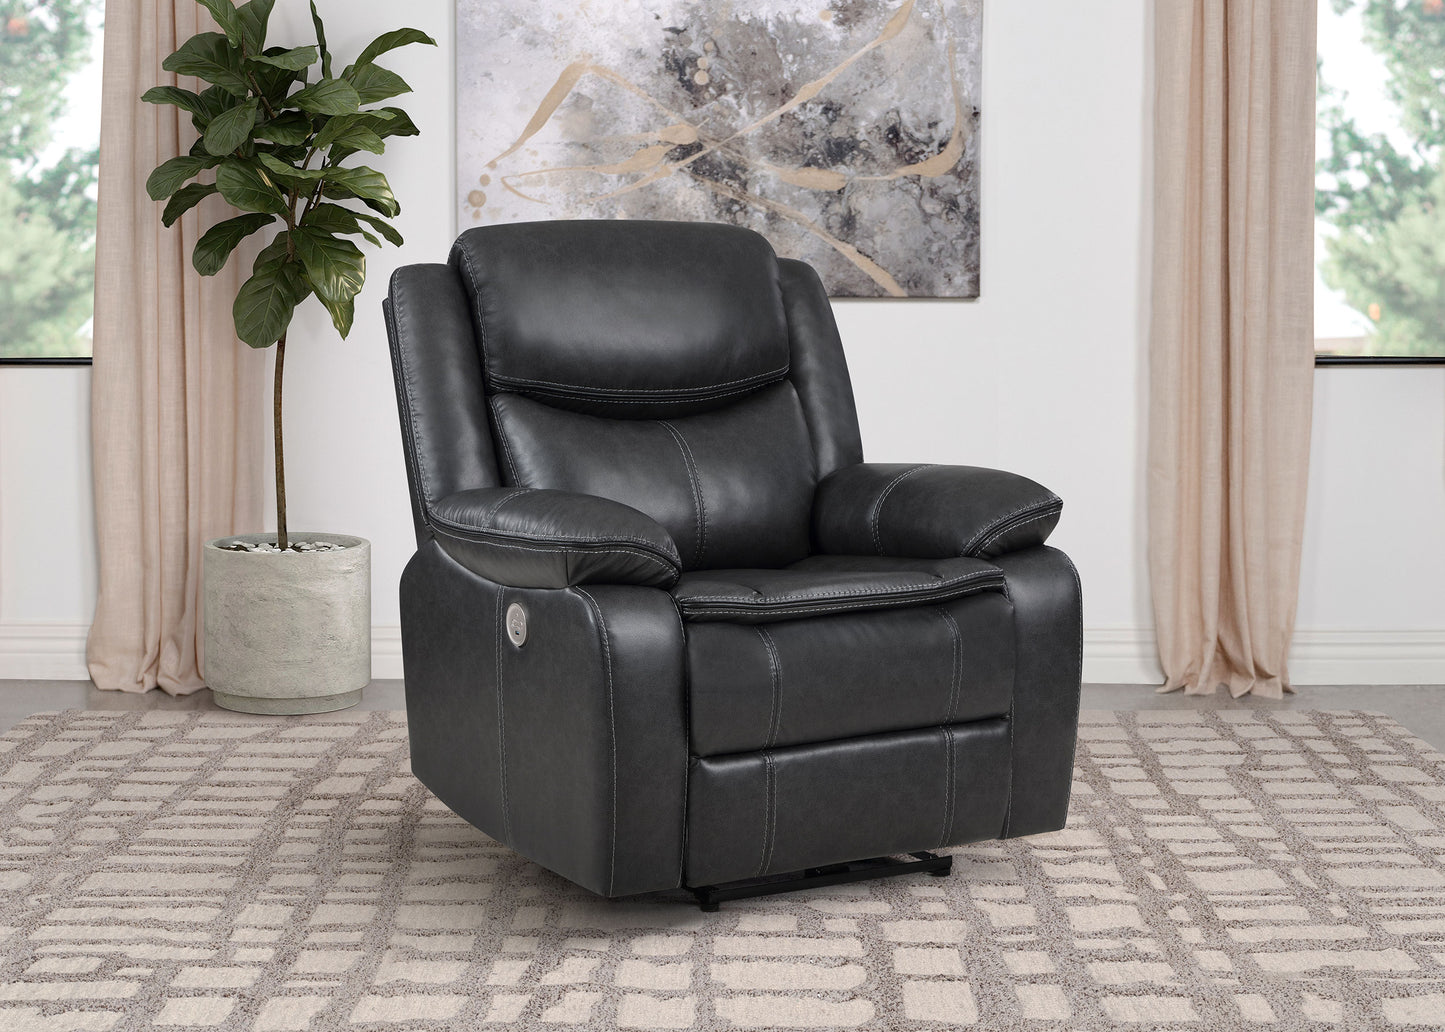 Sycamore Upholstered Power Recliner Chair Dark Grey